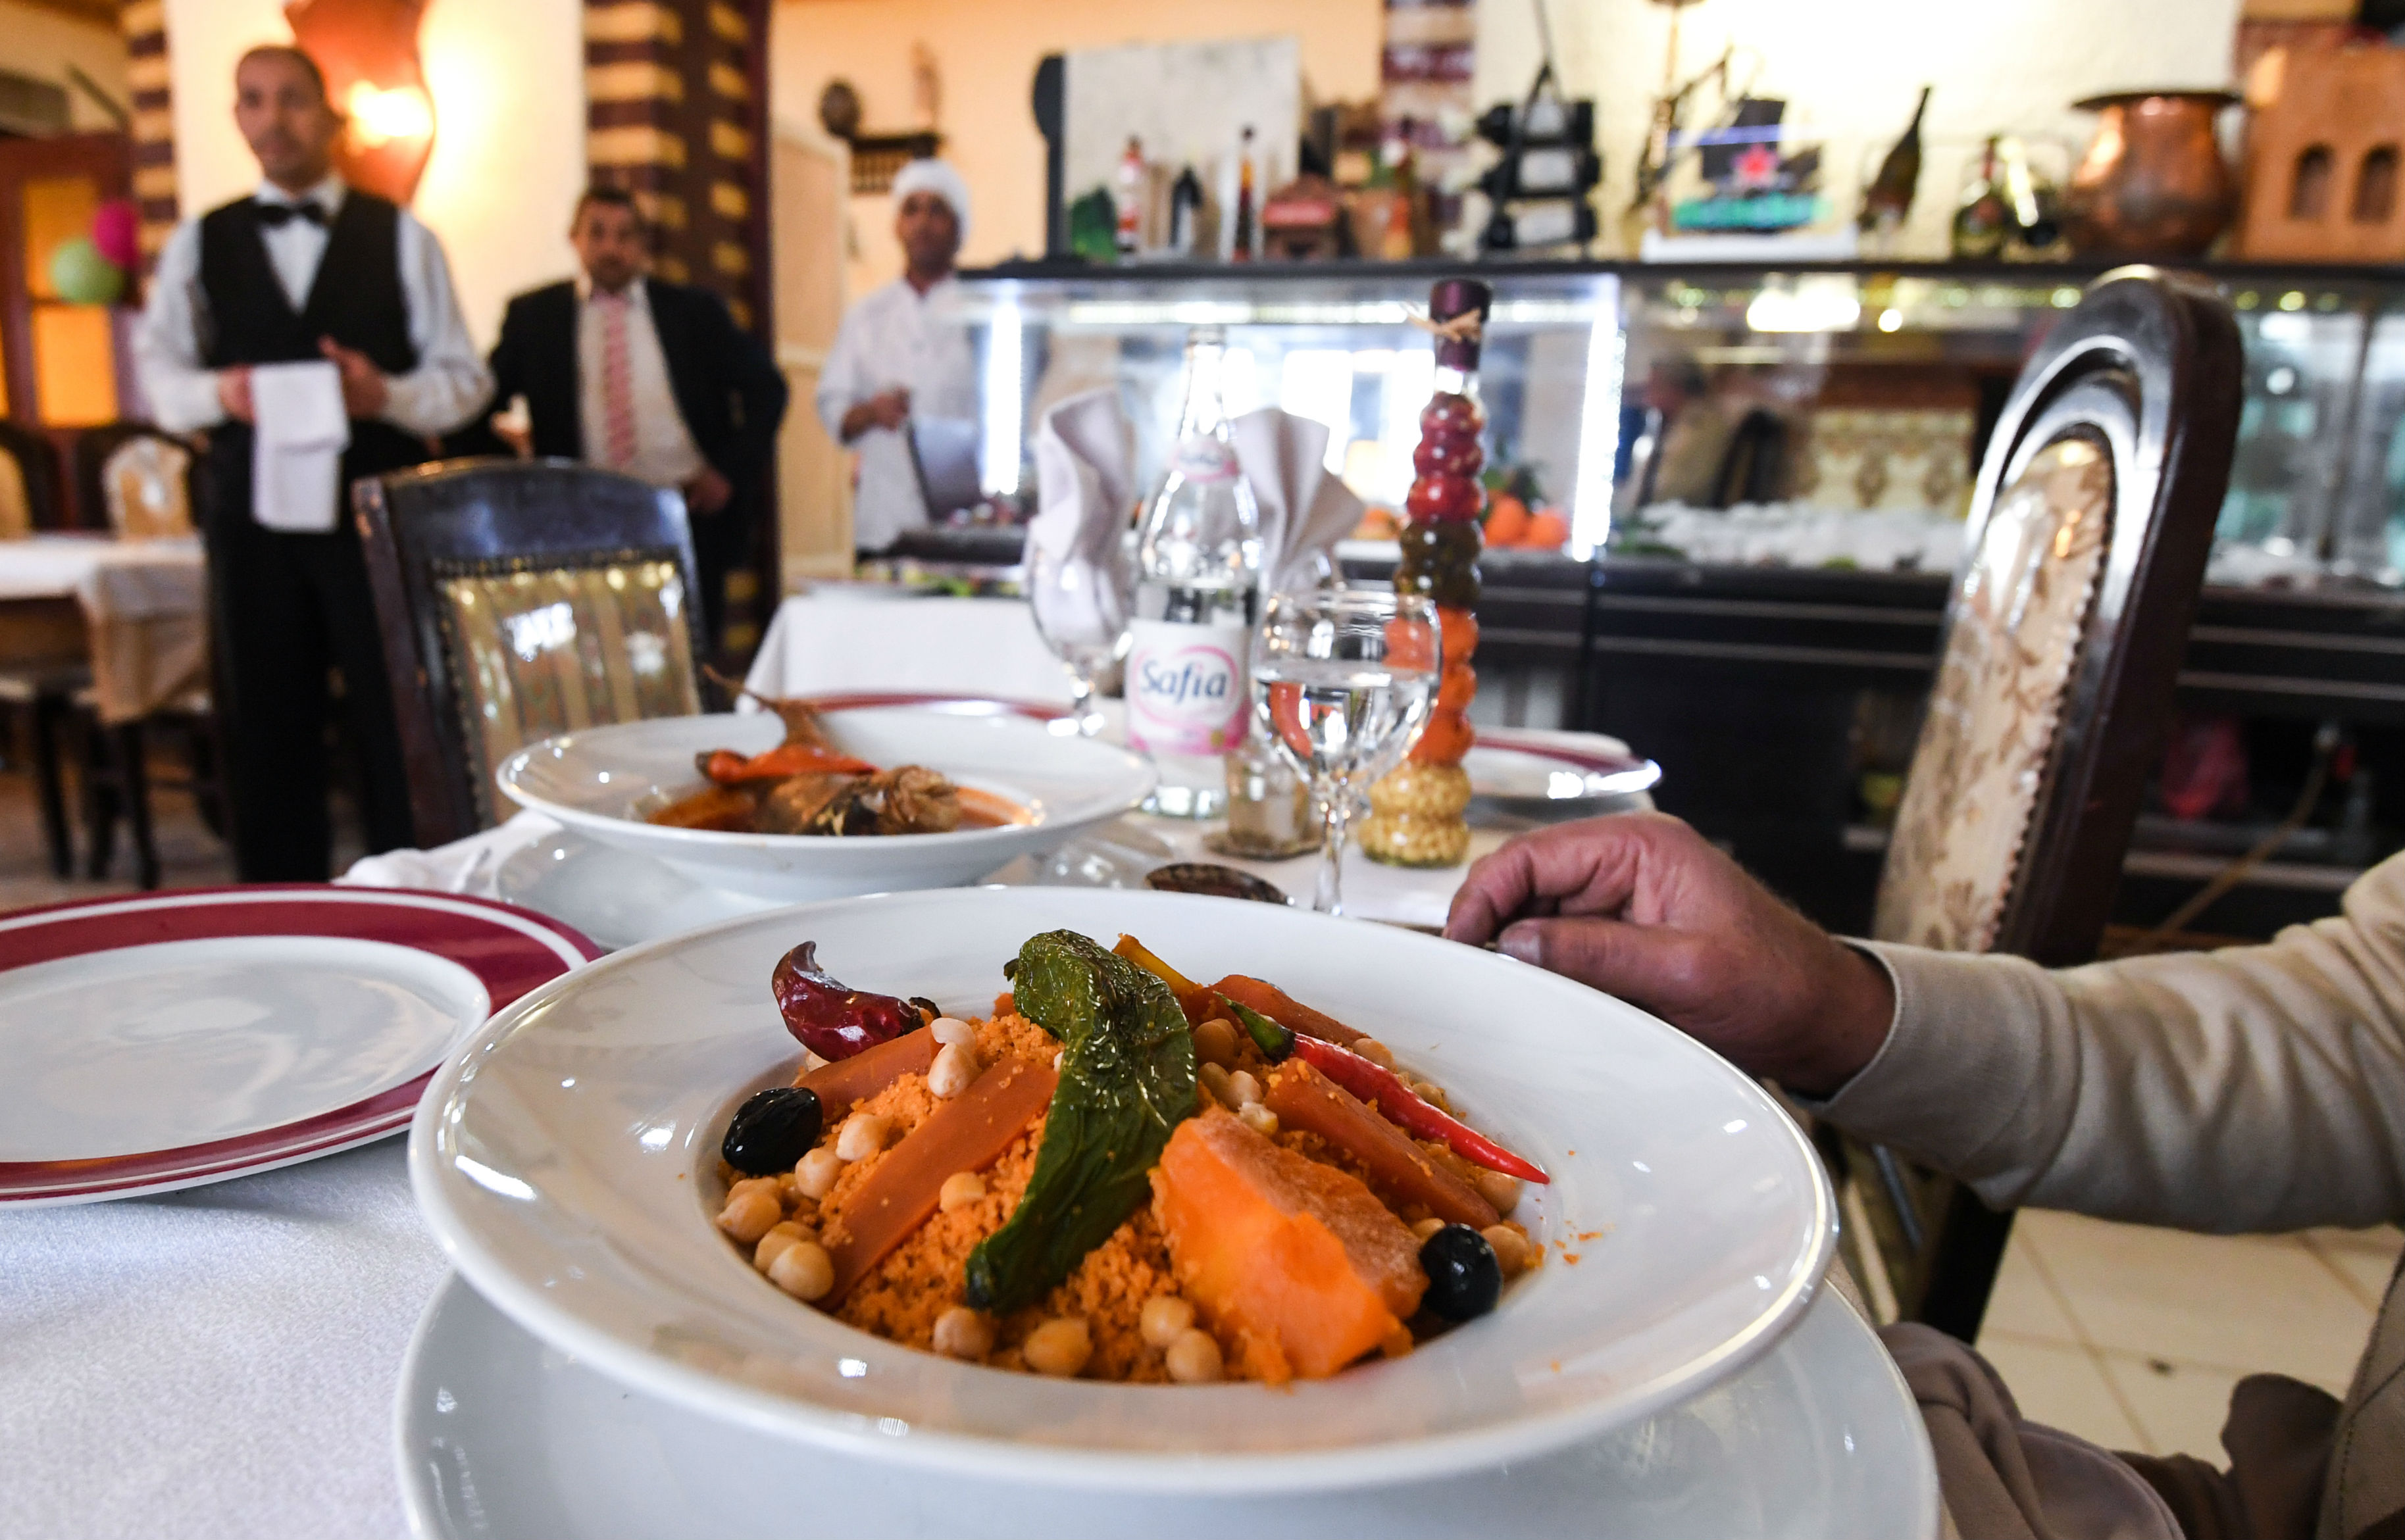 Patrons are served couscous dish at the restaurant L'Orient in Tunis in January 2018 (AFP)